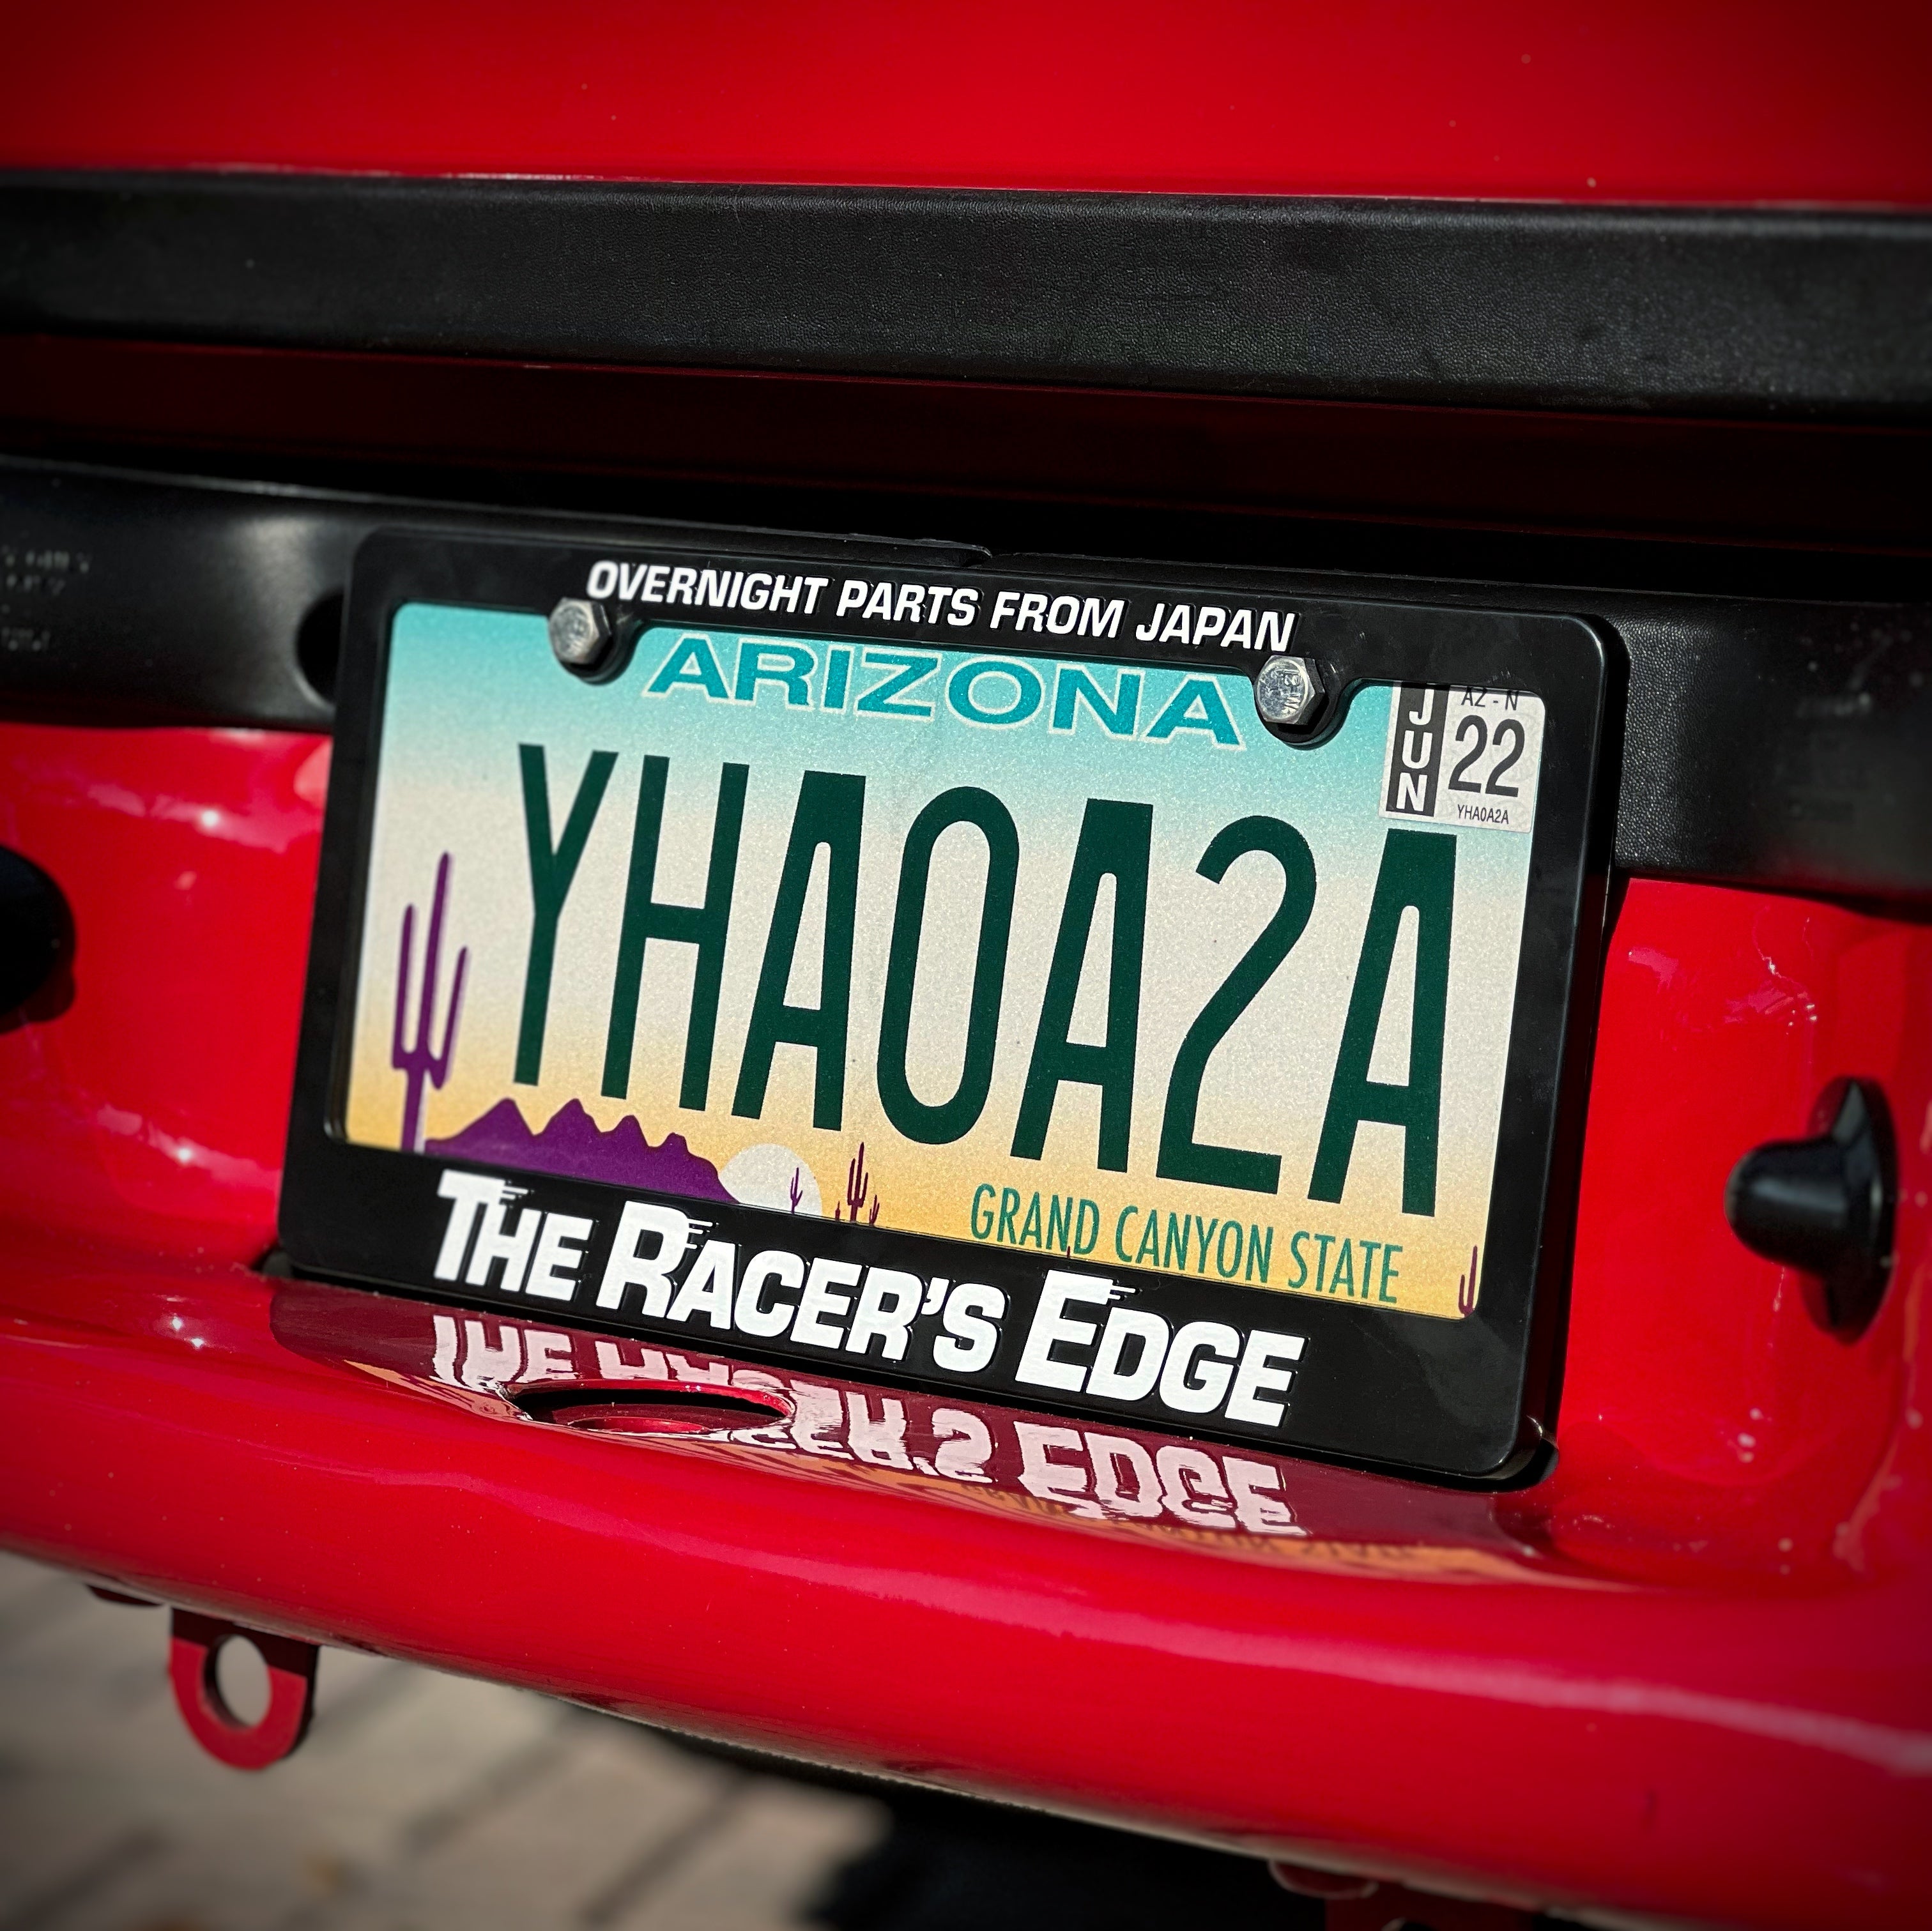 Racers Edge “ Overnight Parts from Japan ” License Plate Frame